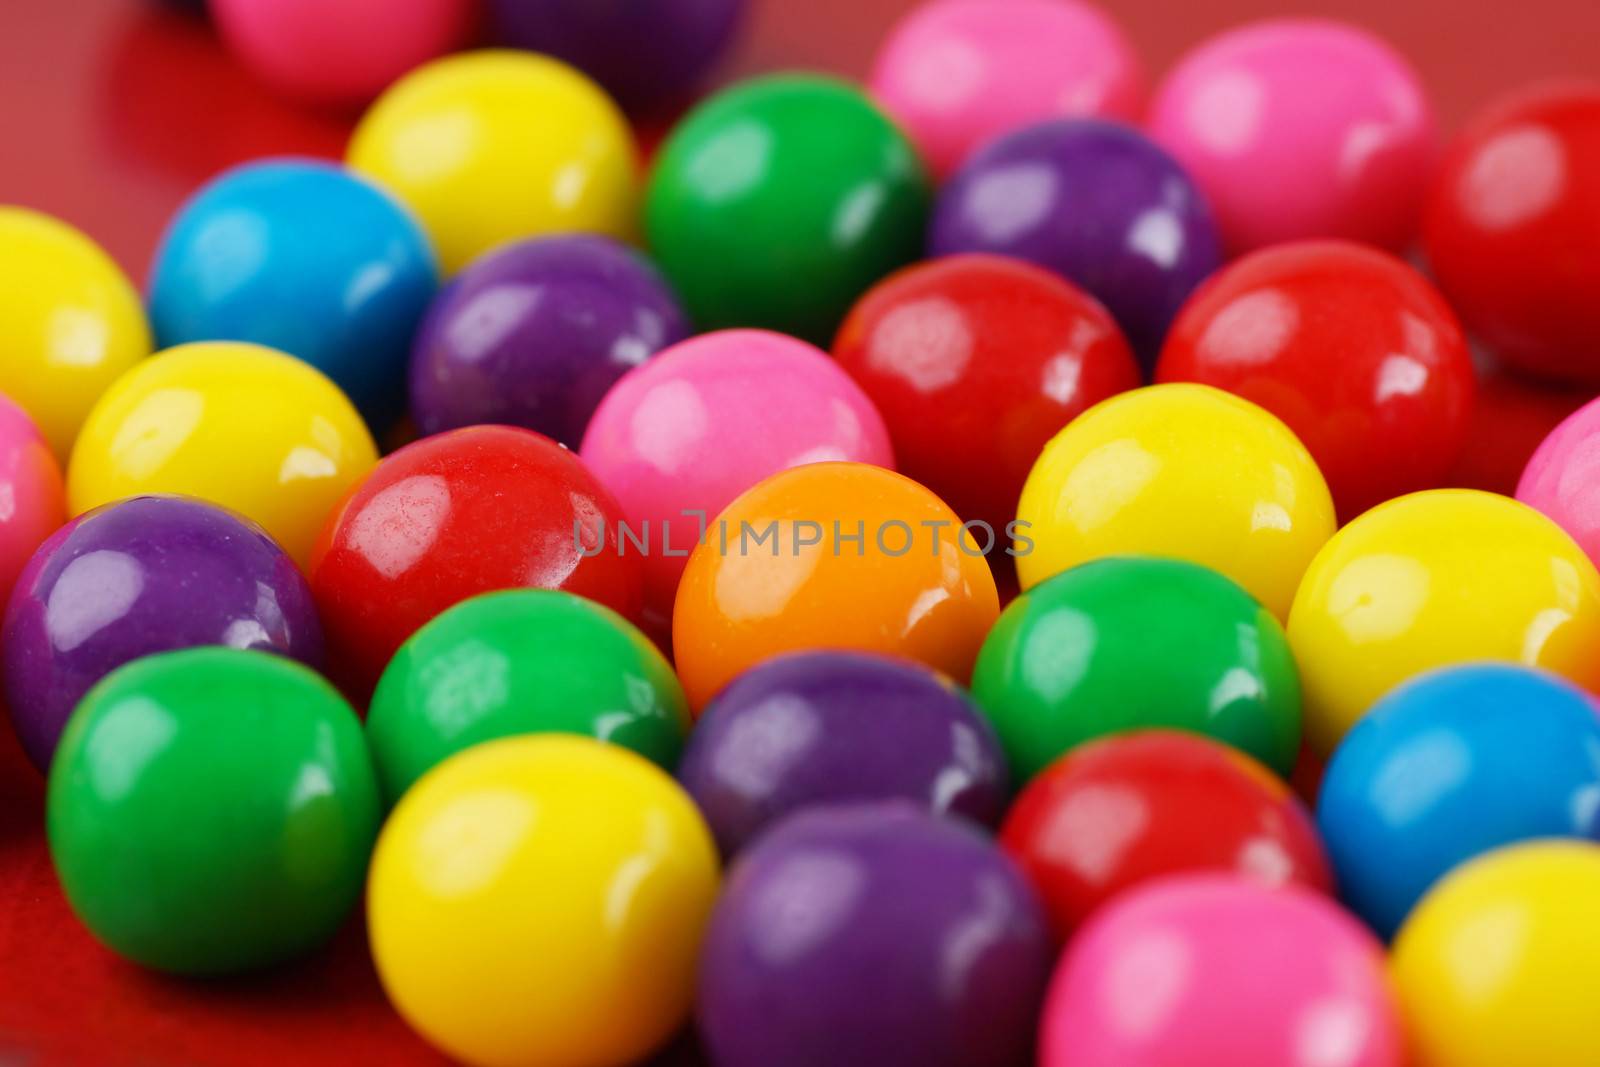 Colorful gumballs with only one orange in the middle